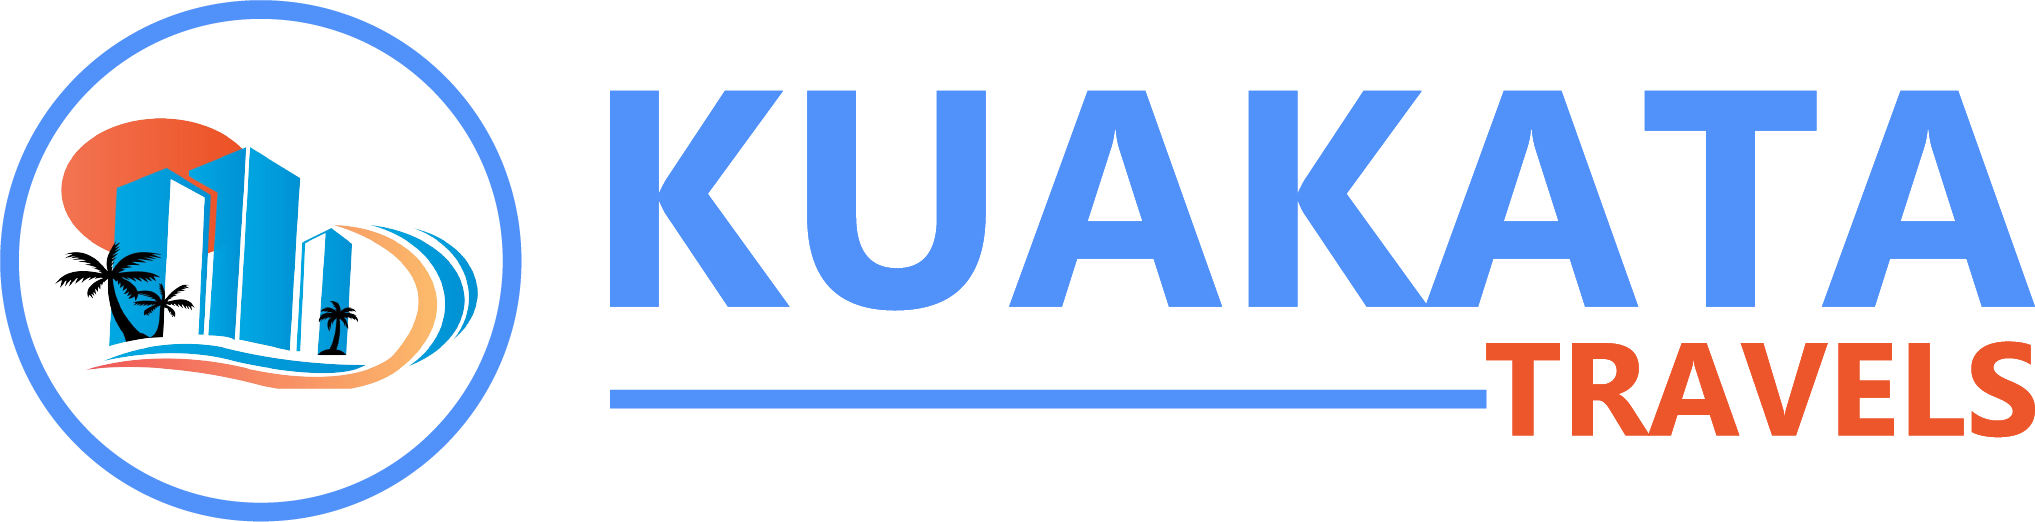 Online Hotel Booking For Kuakata Travels